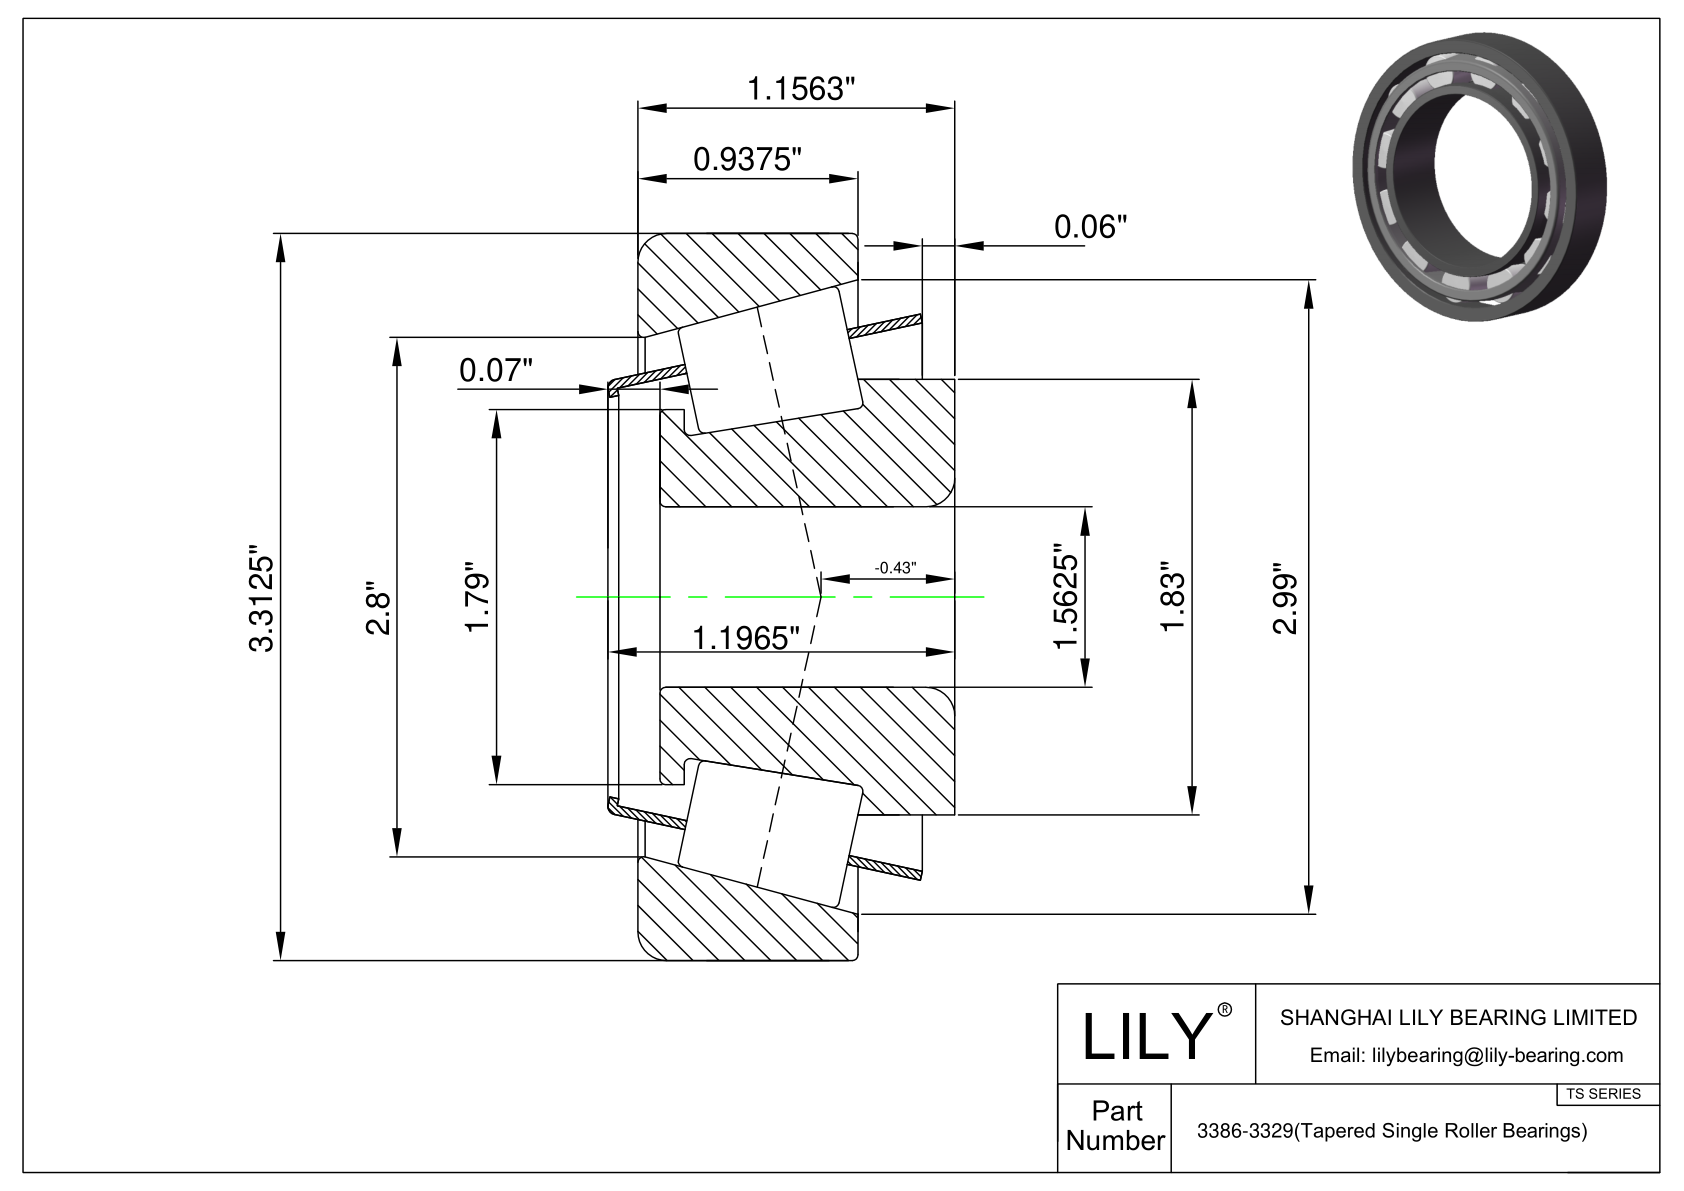 3386-3329 TS (Tapered Single Roller Bearings) (Imperial) cad drawing